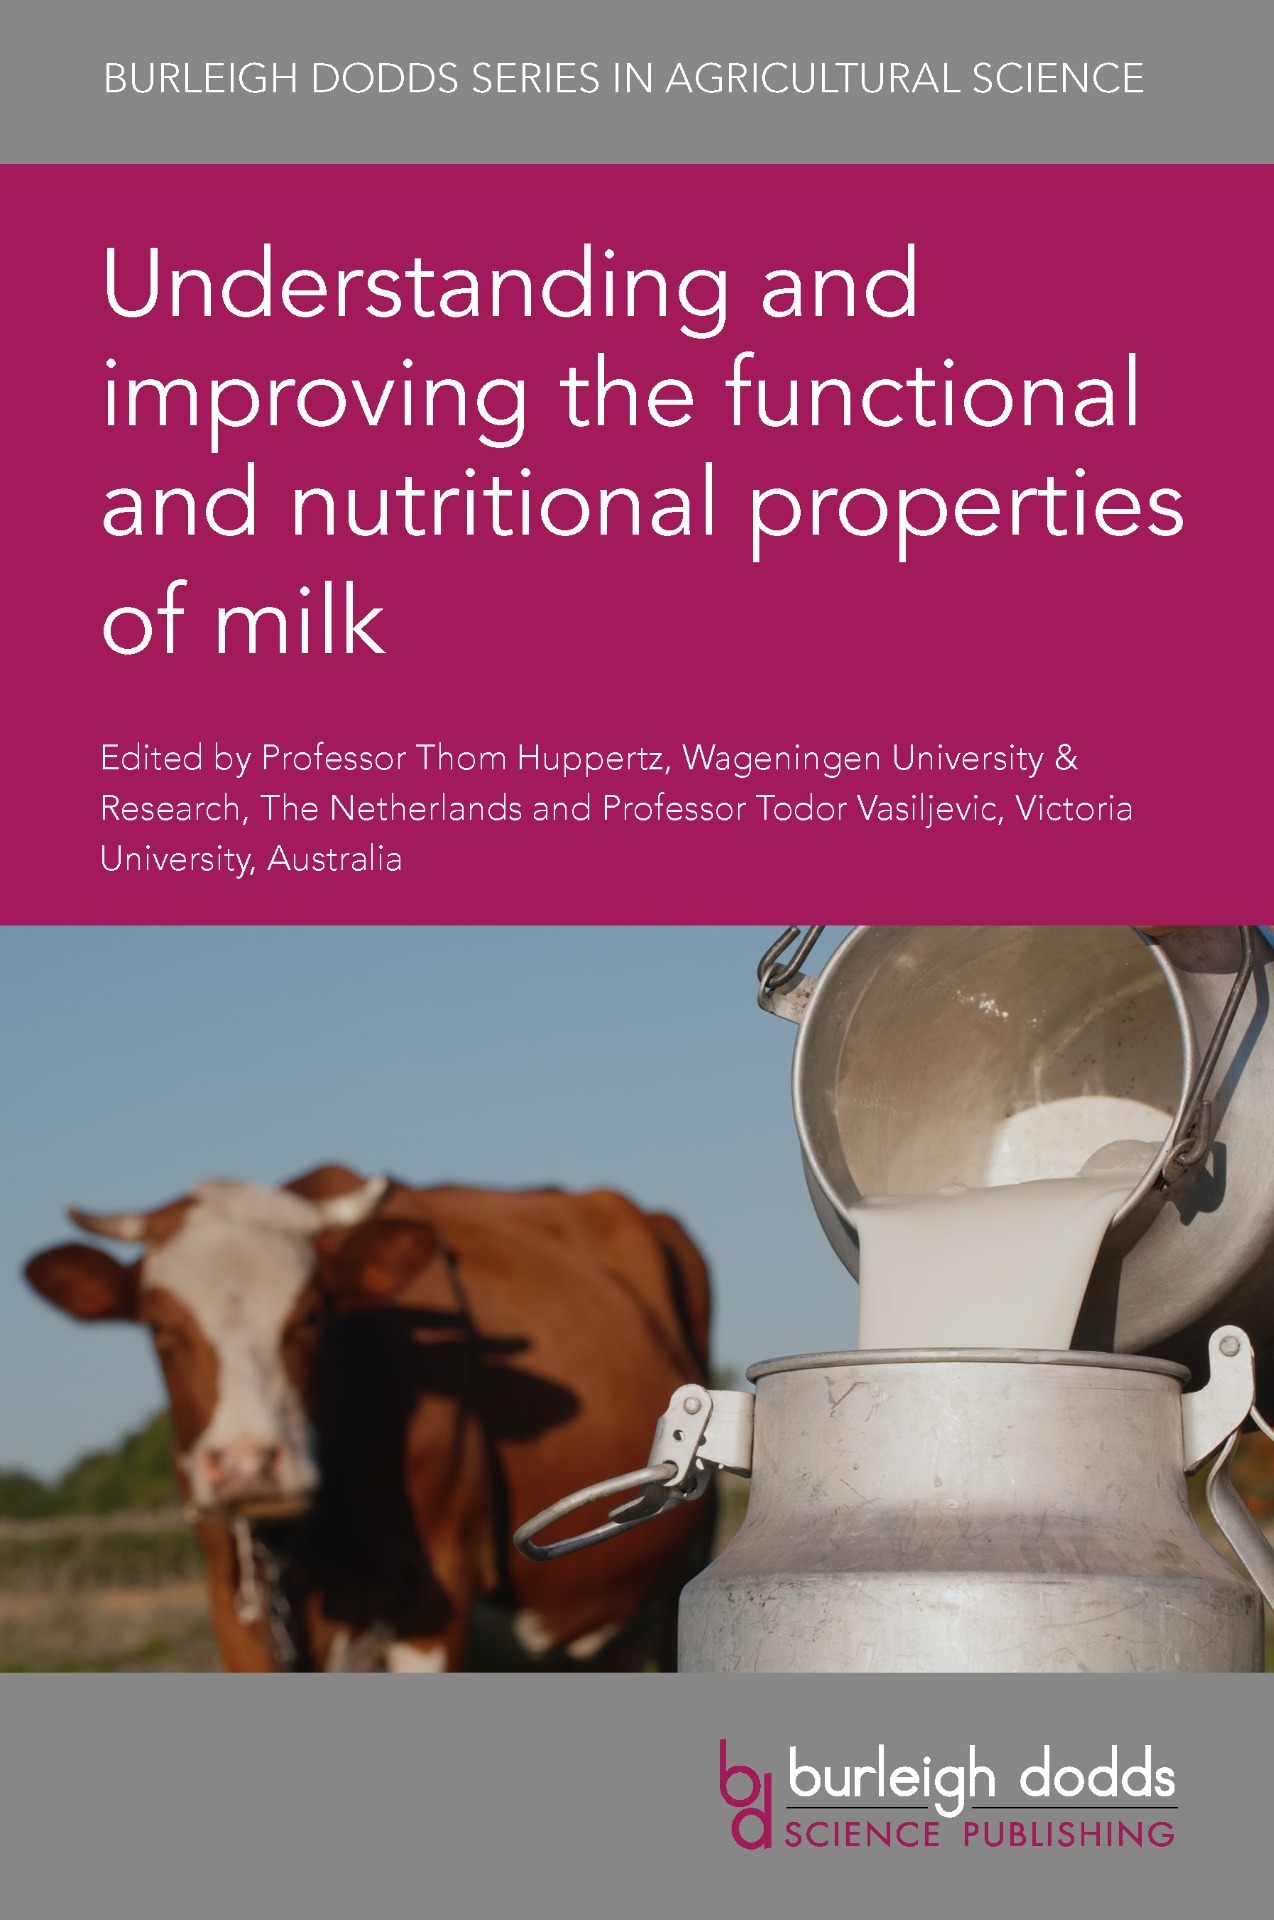 Understanding and improving the functional and nutritional properties of milk